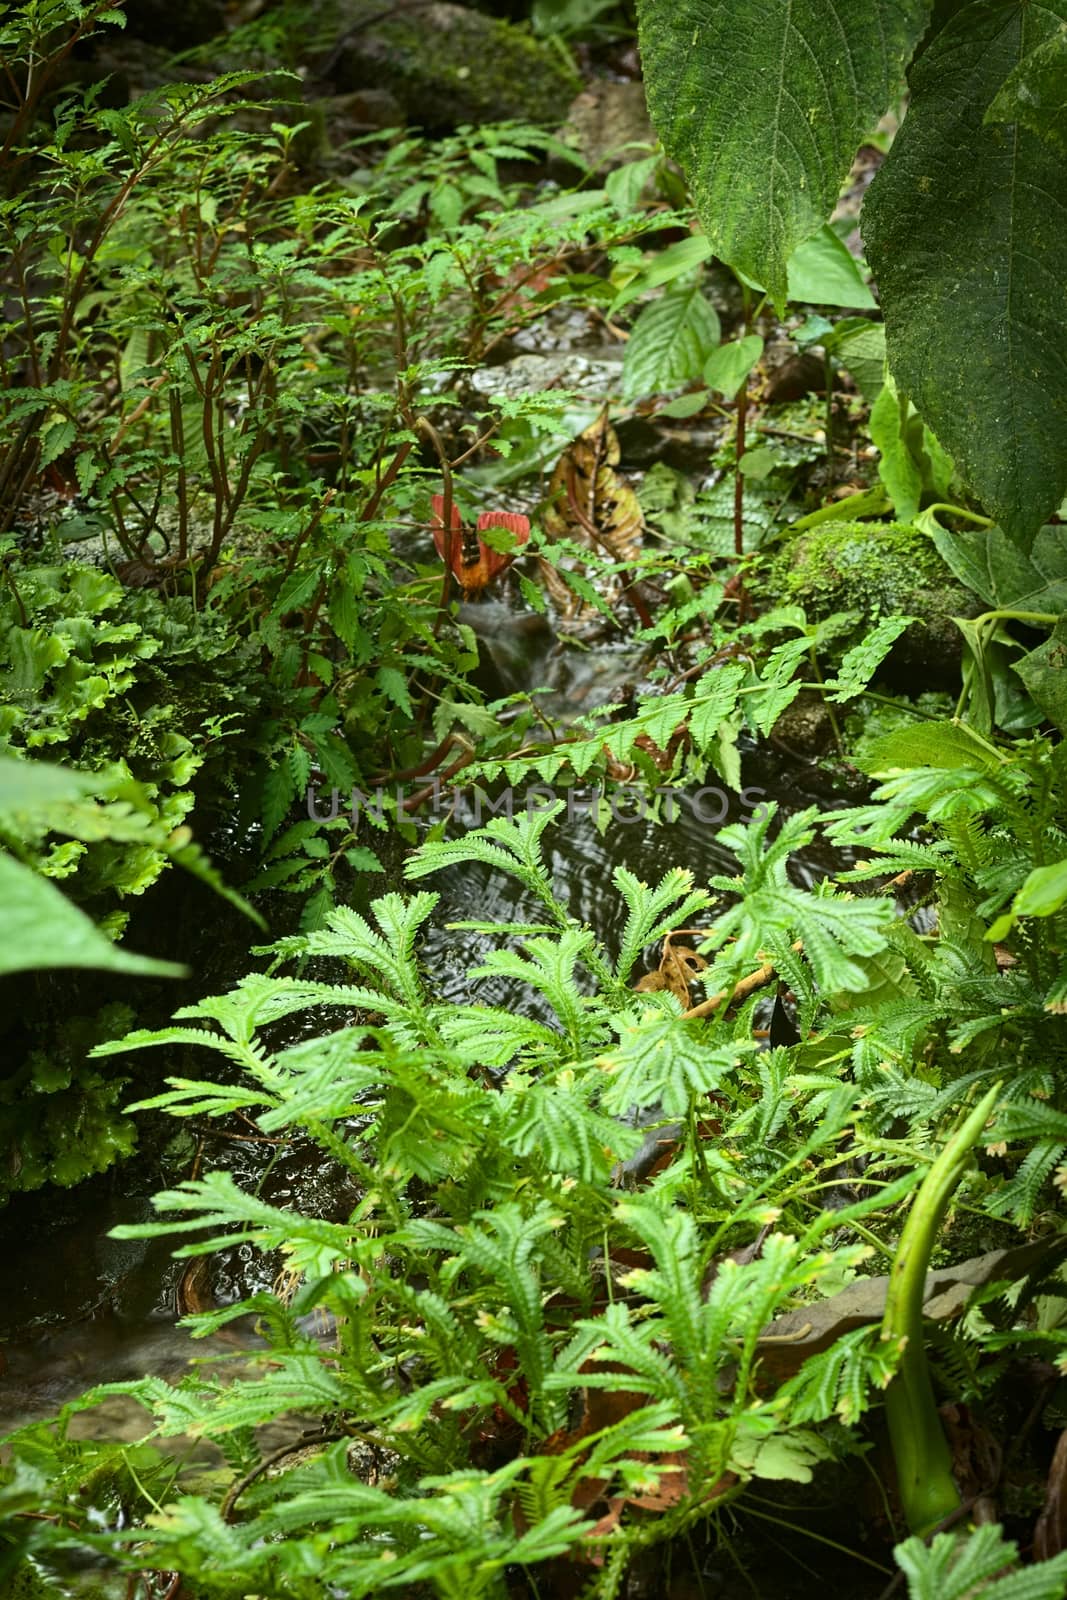 Small brook surrounded by lush vegetation in cloud forest in Ecuador close to the small town of Rio Verde (Selective Focus, Focus one third into the image)